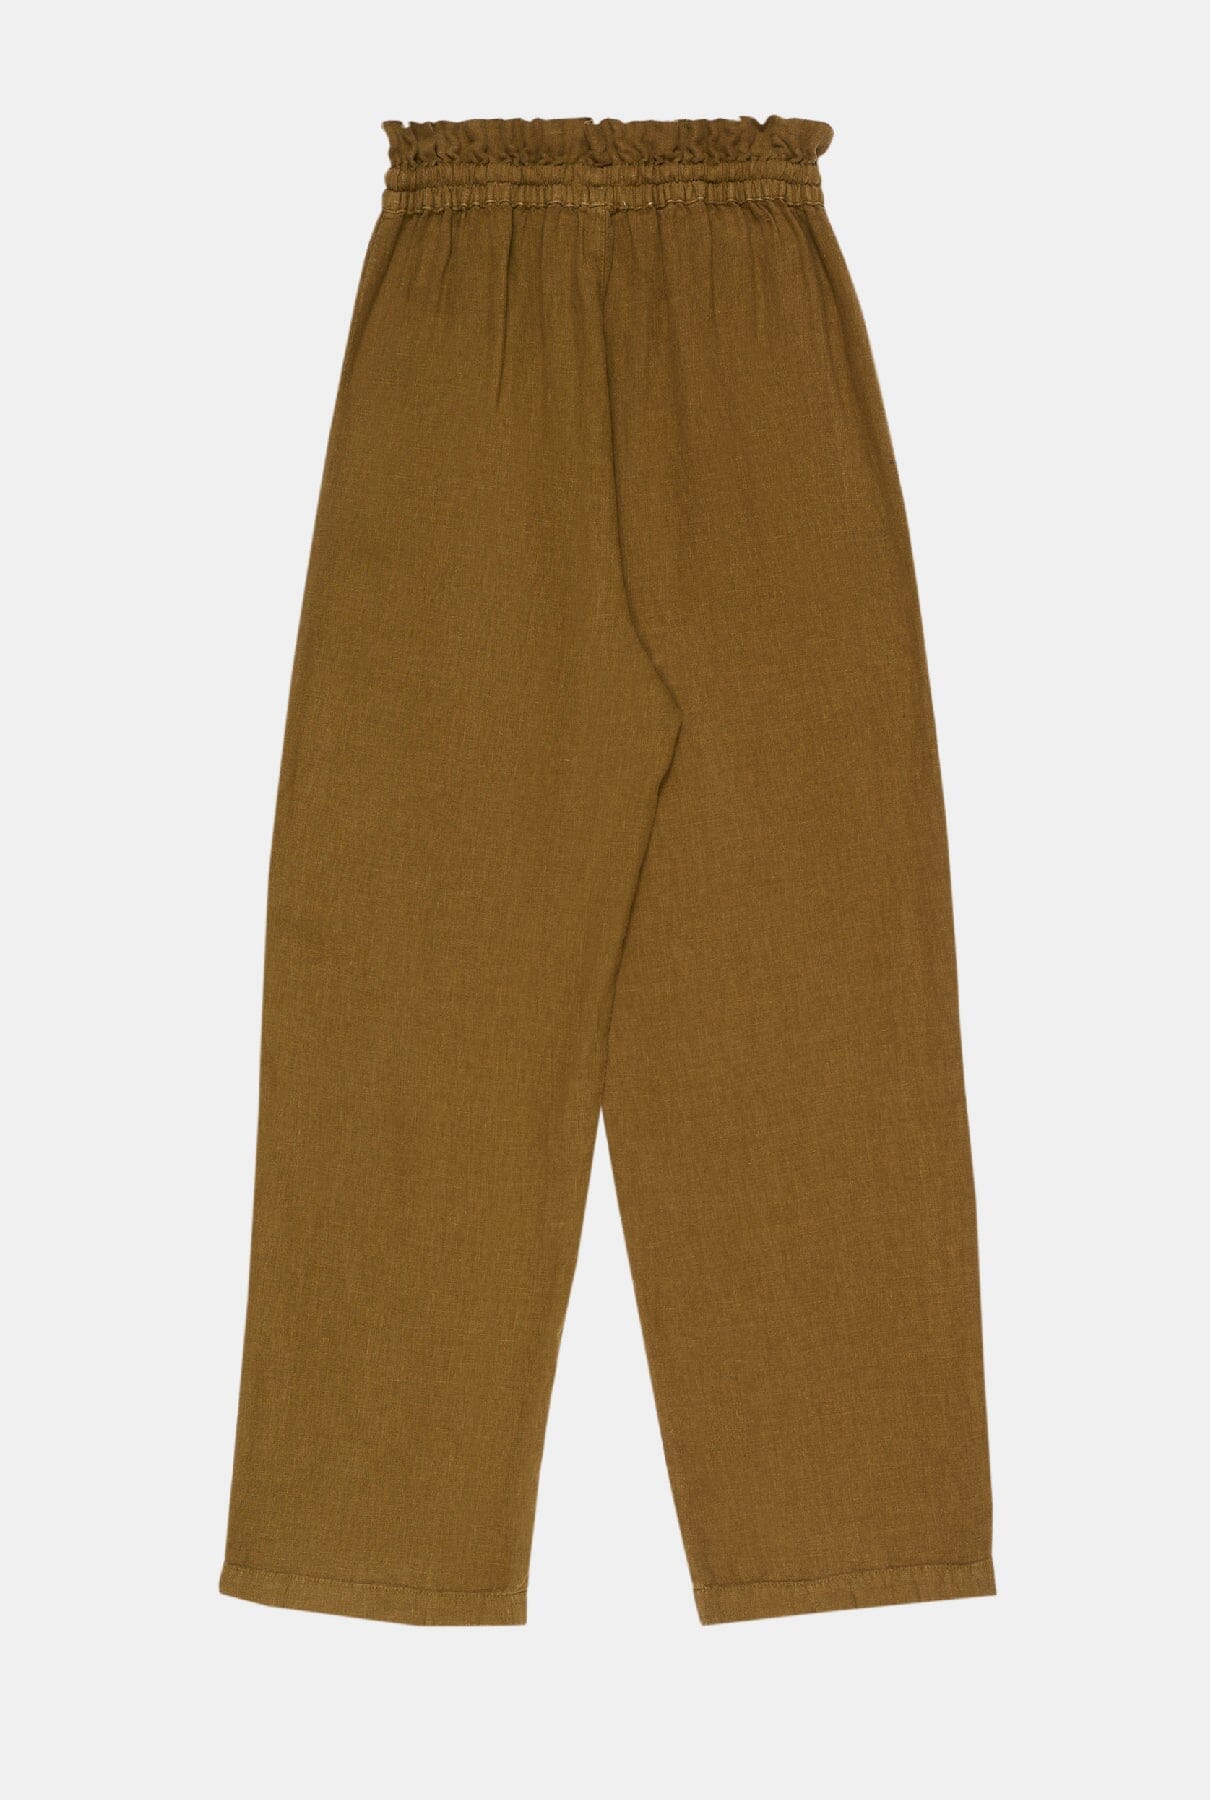 Long Beach Woman Pant Hills View Trousers The New Society 